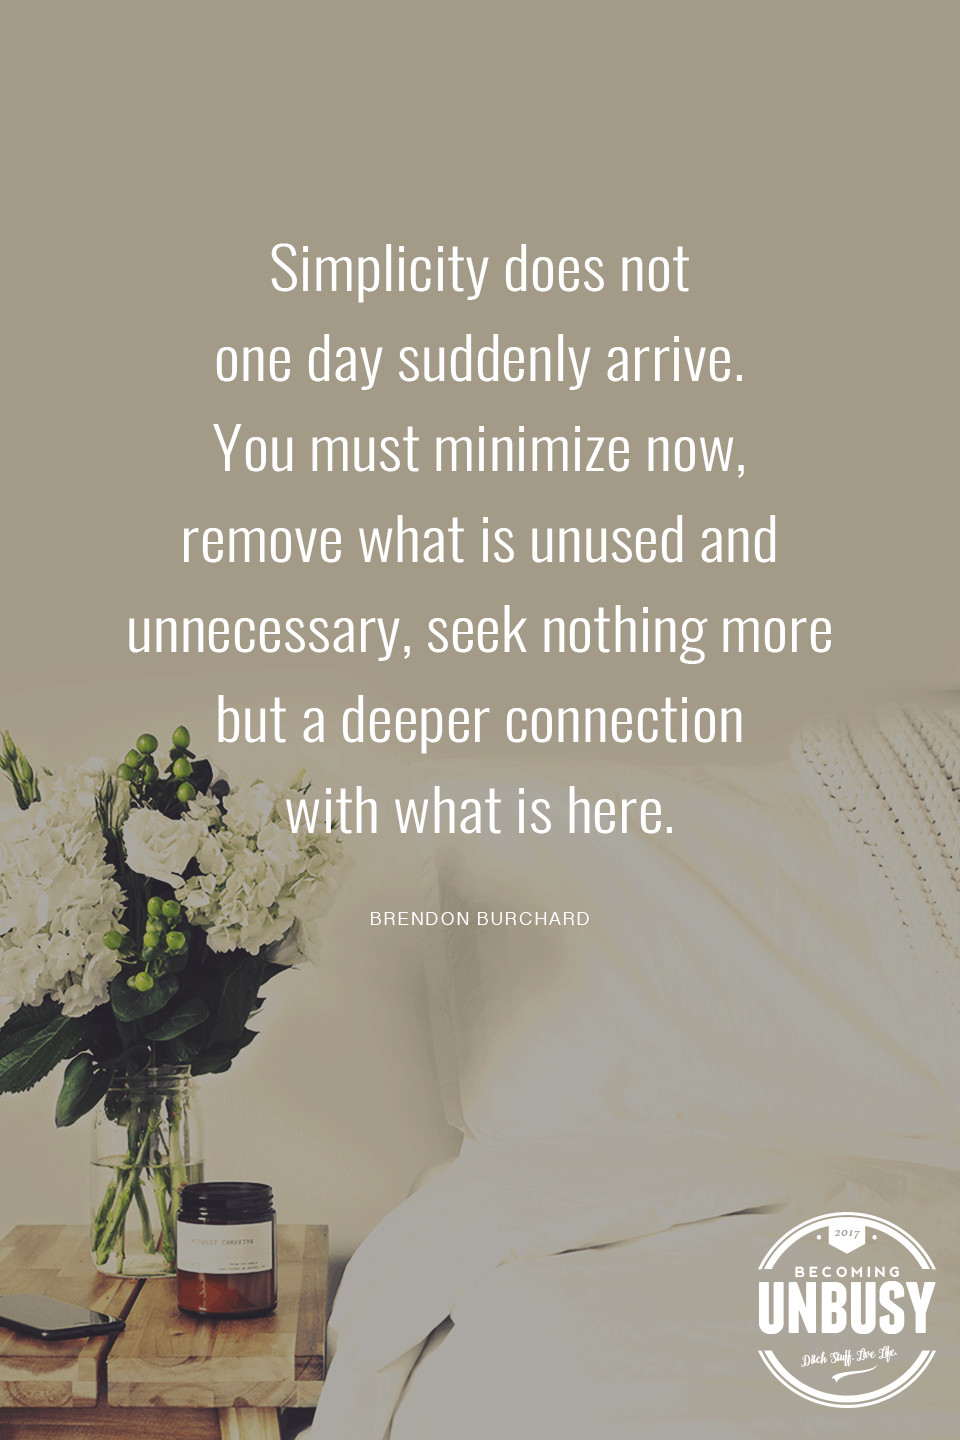 Simplicity does not one day suddenly arrive. You must minimize now, remove what is unused and unnecessary, seek nothing more but a deeper connection with what is here. - Brendon Burchard *Love this quote, this list and this Becoming UnBusy site